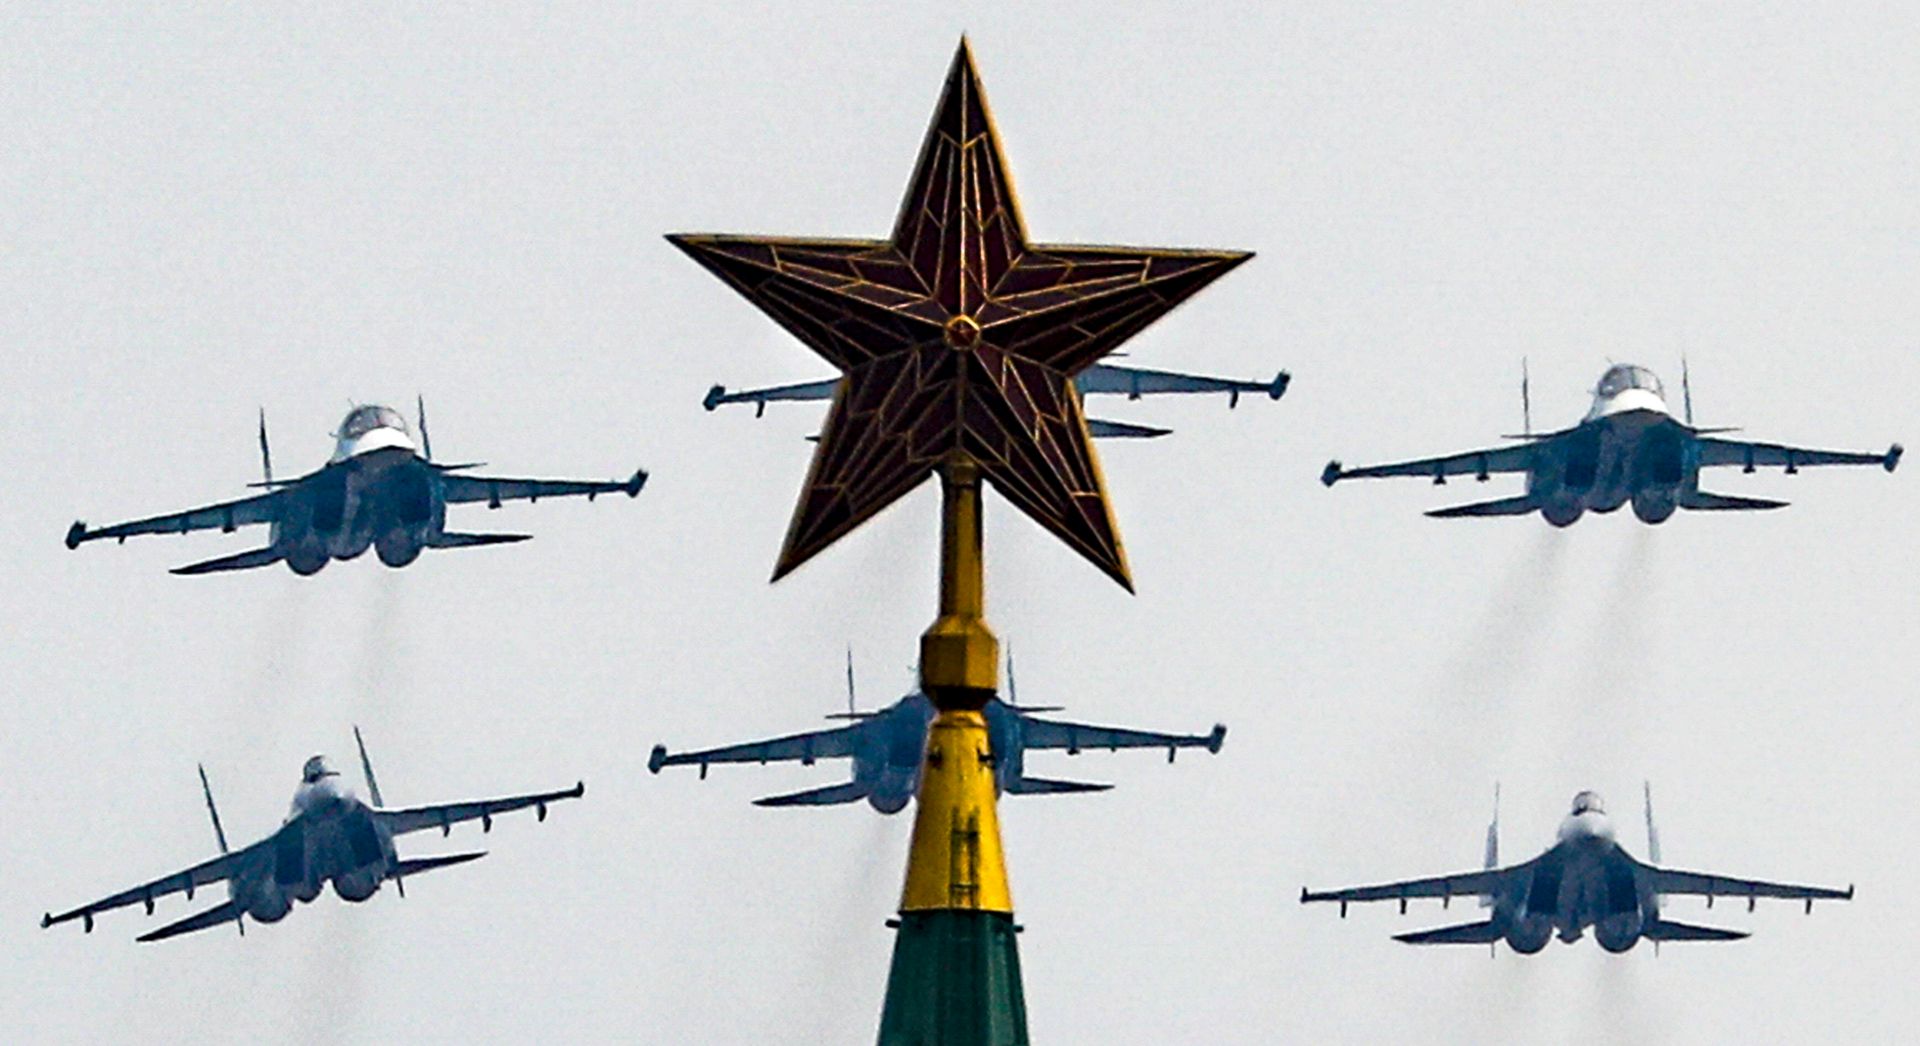 epa08399438 Aircrafts fly above Spaskaya rower of the Moscow Kremlin  during the general rehearsal of the Victory Day parade in Moscow, Russia, 04 May 2020. Russian President Vladimir Putin postponed a military parade to mark the 75th anniversary of Soviet victory in World War II, for prevent the spreading of the coronavirus SARS-CoV-2 pandemic.  EPA/SERGEI ILNITSKY